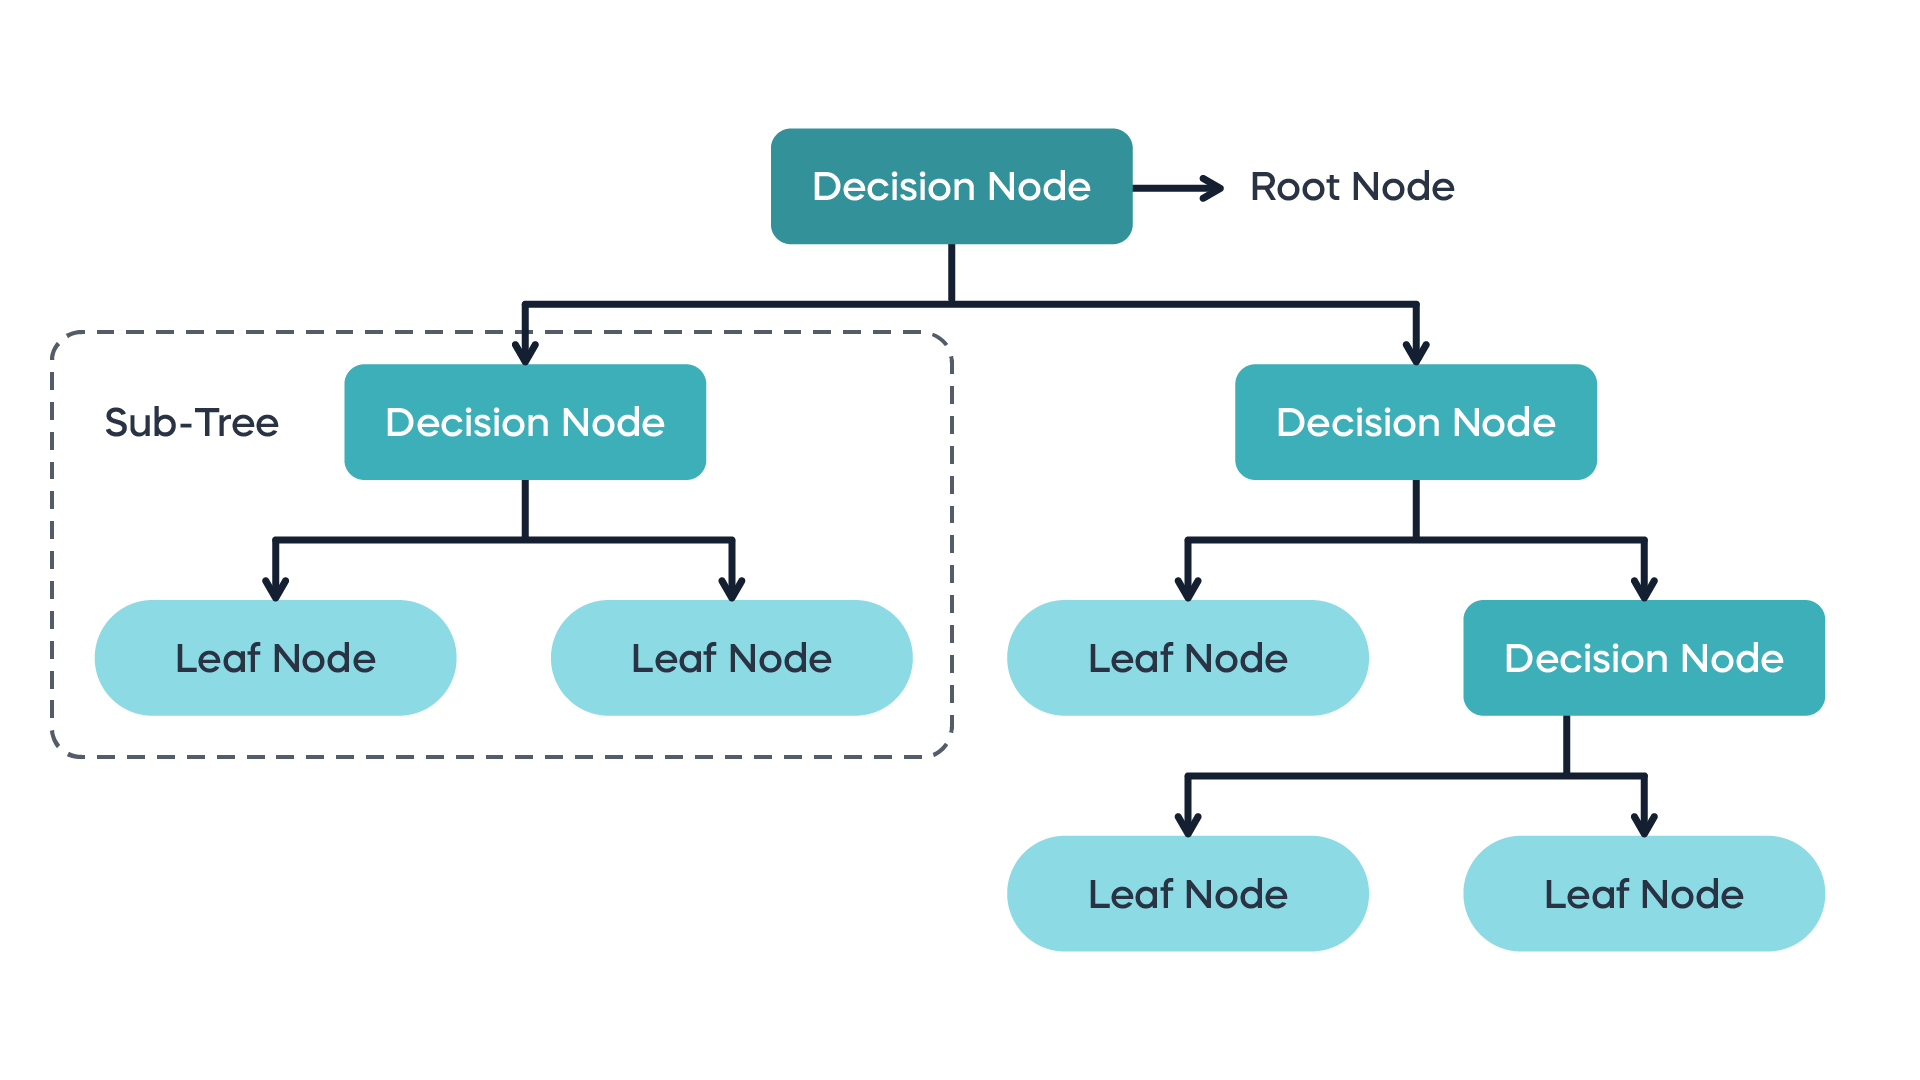 An example of a typical decision tree structure, including decision nodes and leaf nodes.